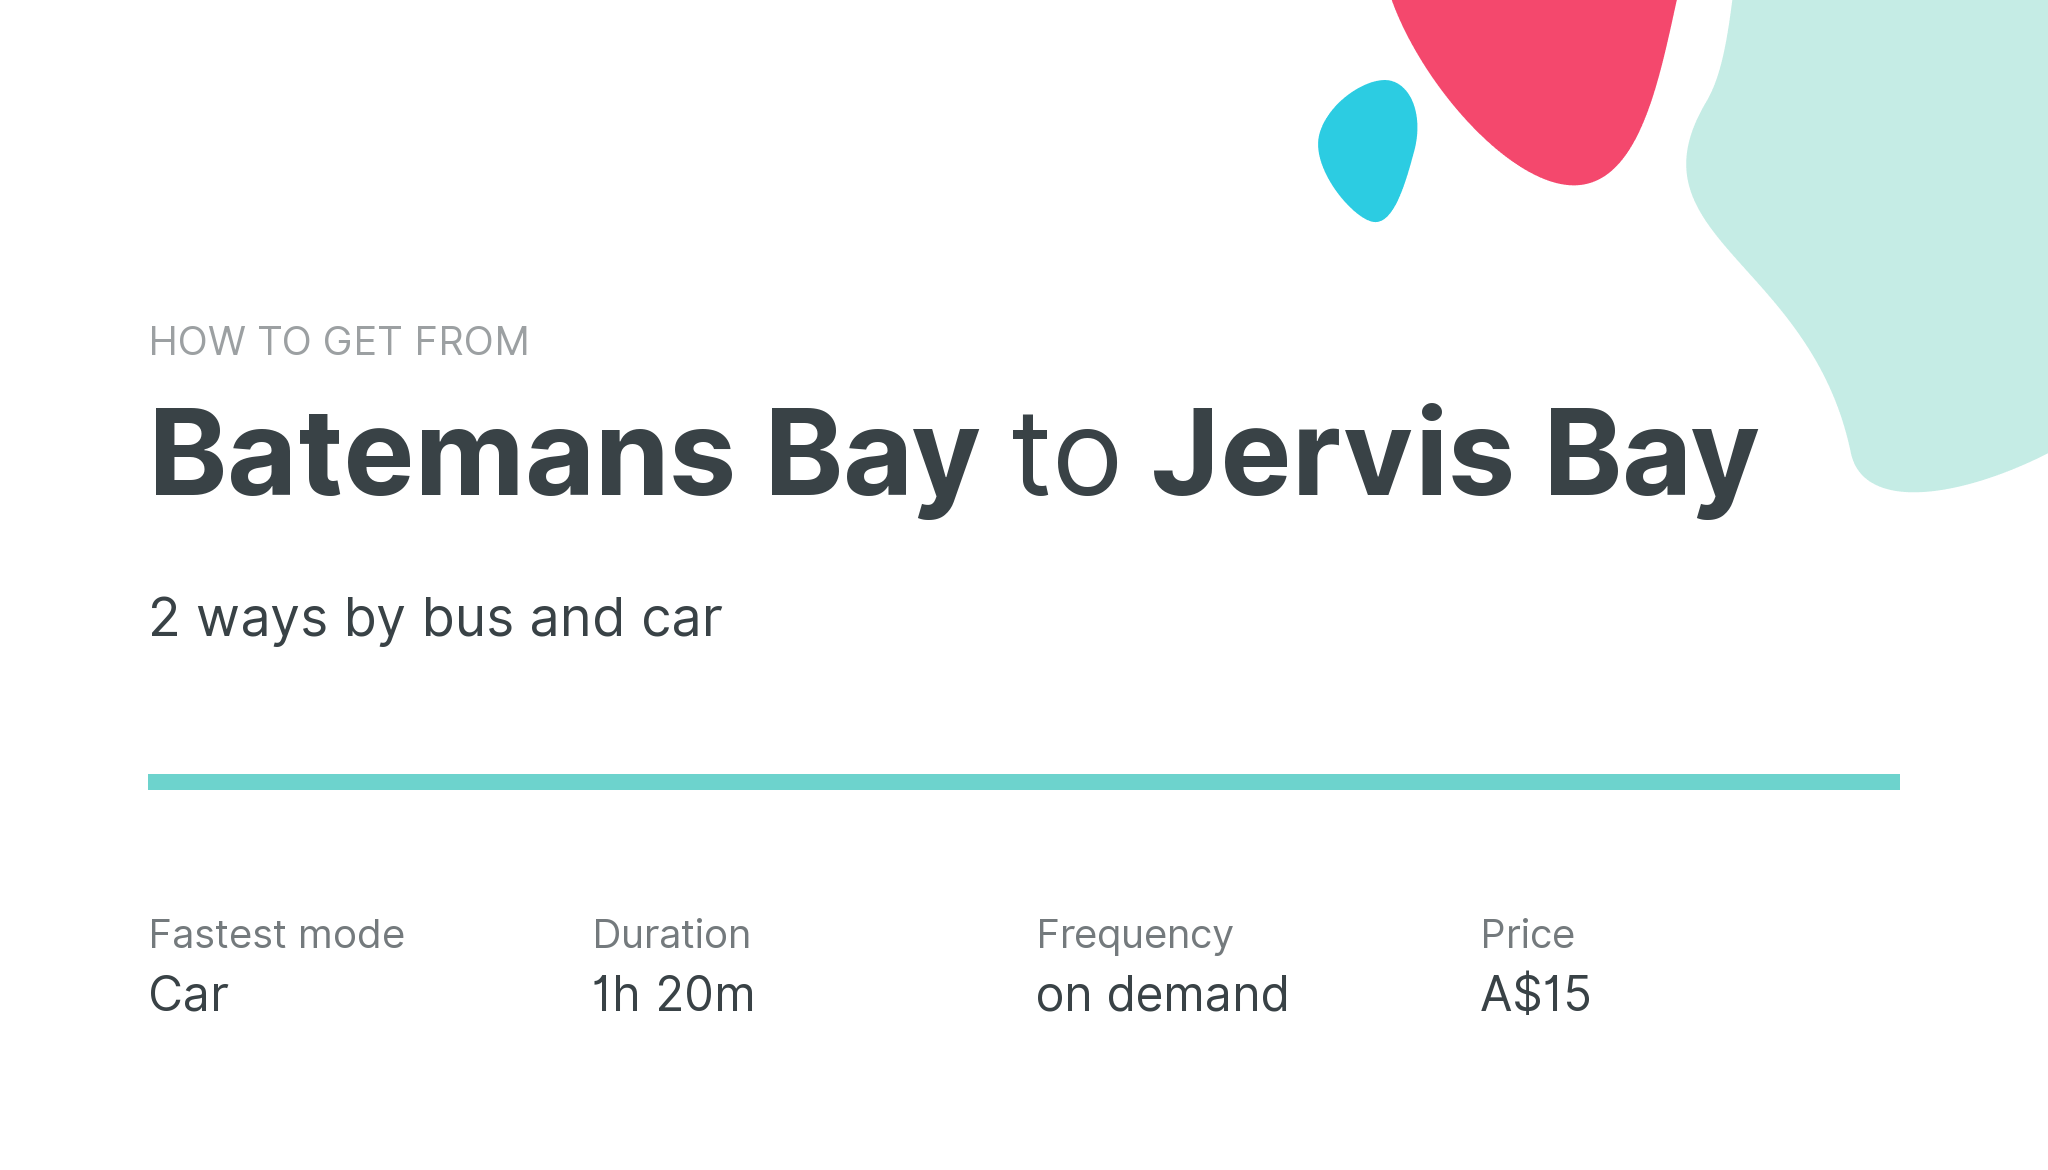 How do I get from Batemans Bay to Jervis Bay